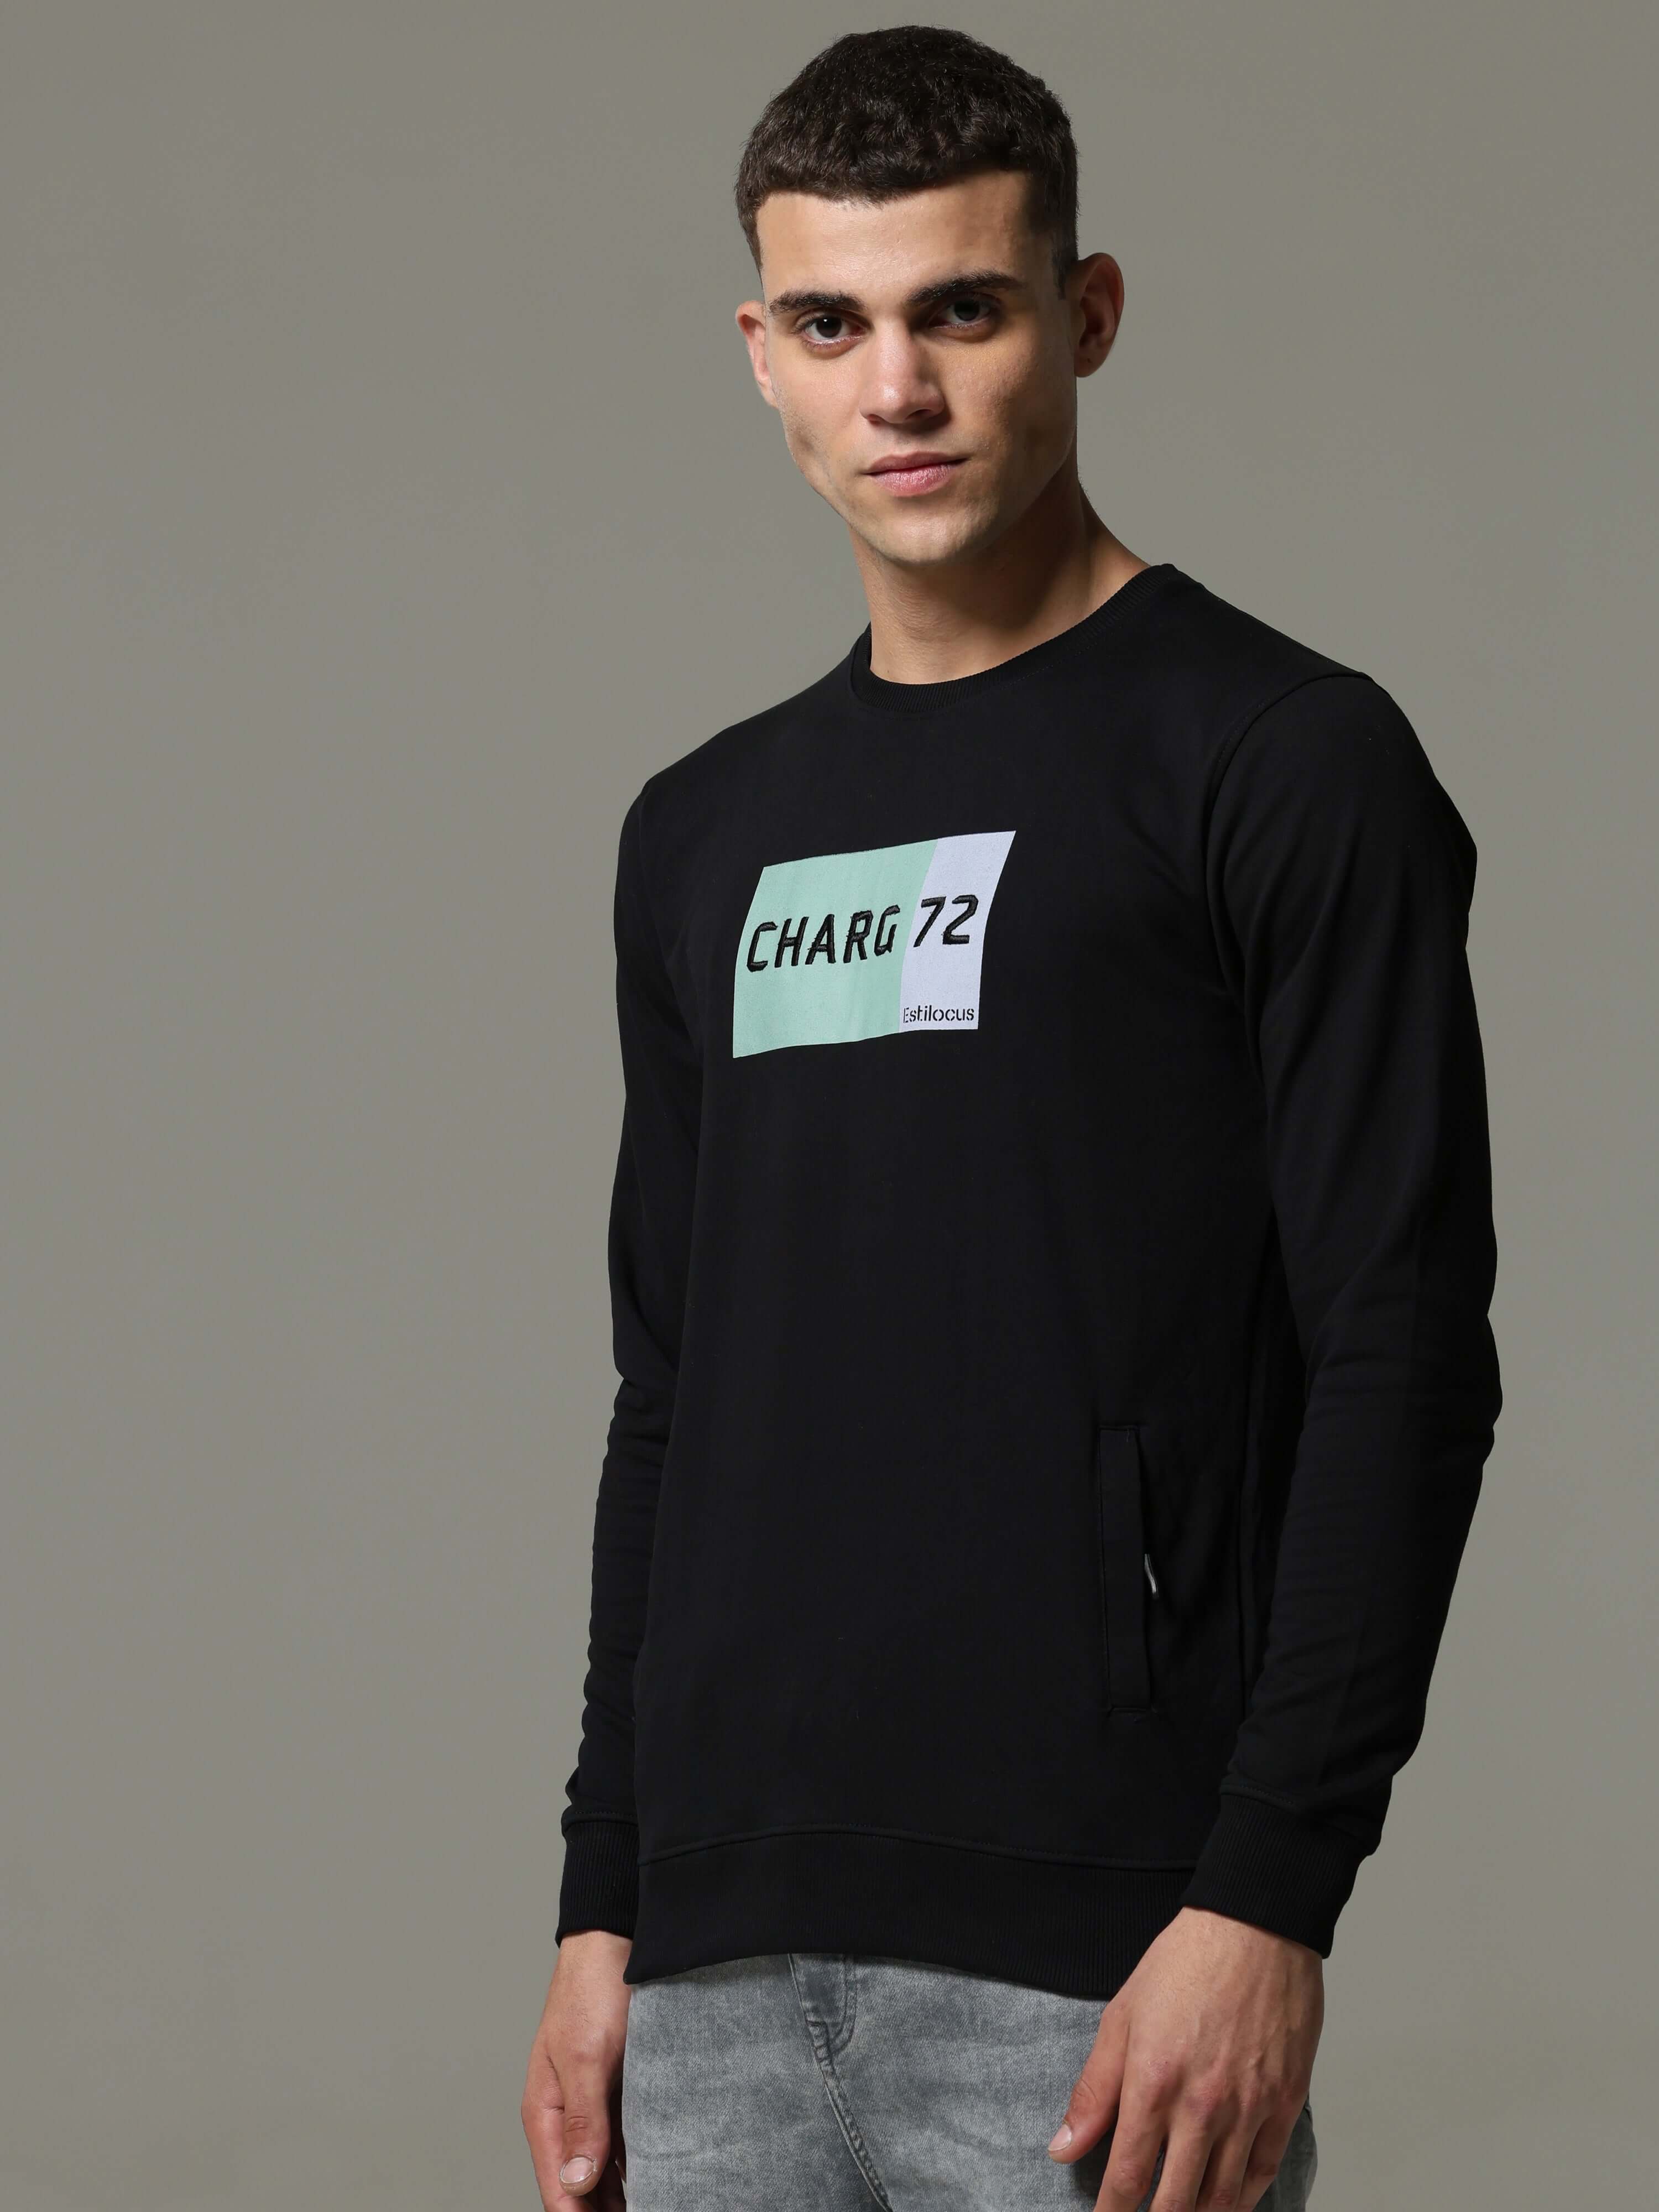 Charg Black Sweat Shirt shop online at Estilocus. • Crew neck• Long sleeve• Ribbing around neckline, Cuff & hem• High quality print and fine embroidery Fit : Comfort fit Size : The model is wearing M size Model height : 6 Feet Wash care : Cold machine was